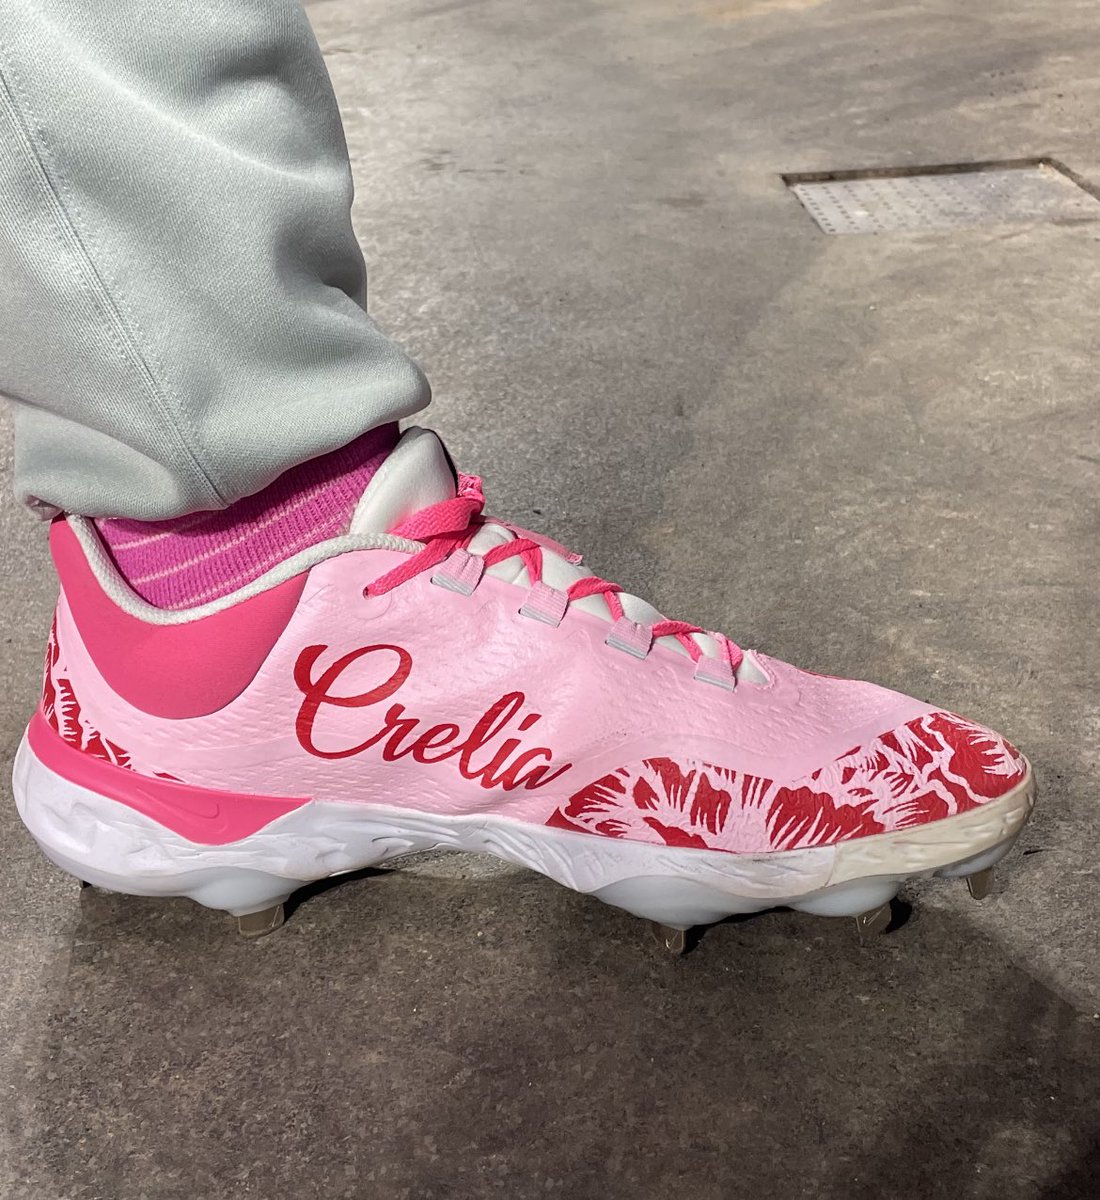 To celebrate Mothers Day, José Alvarado is wearing cleats with his mother’s name on them — Crelia